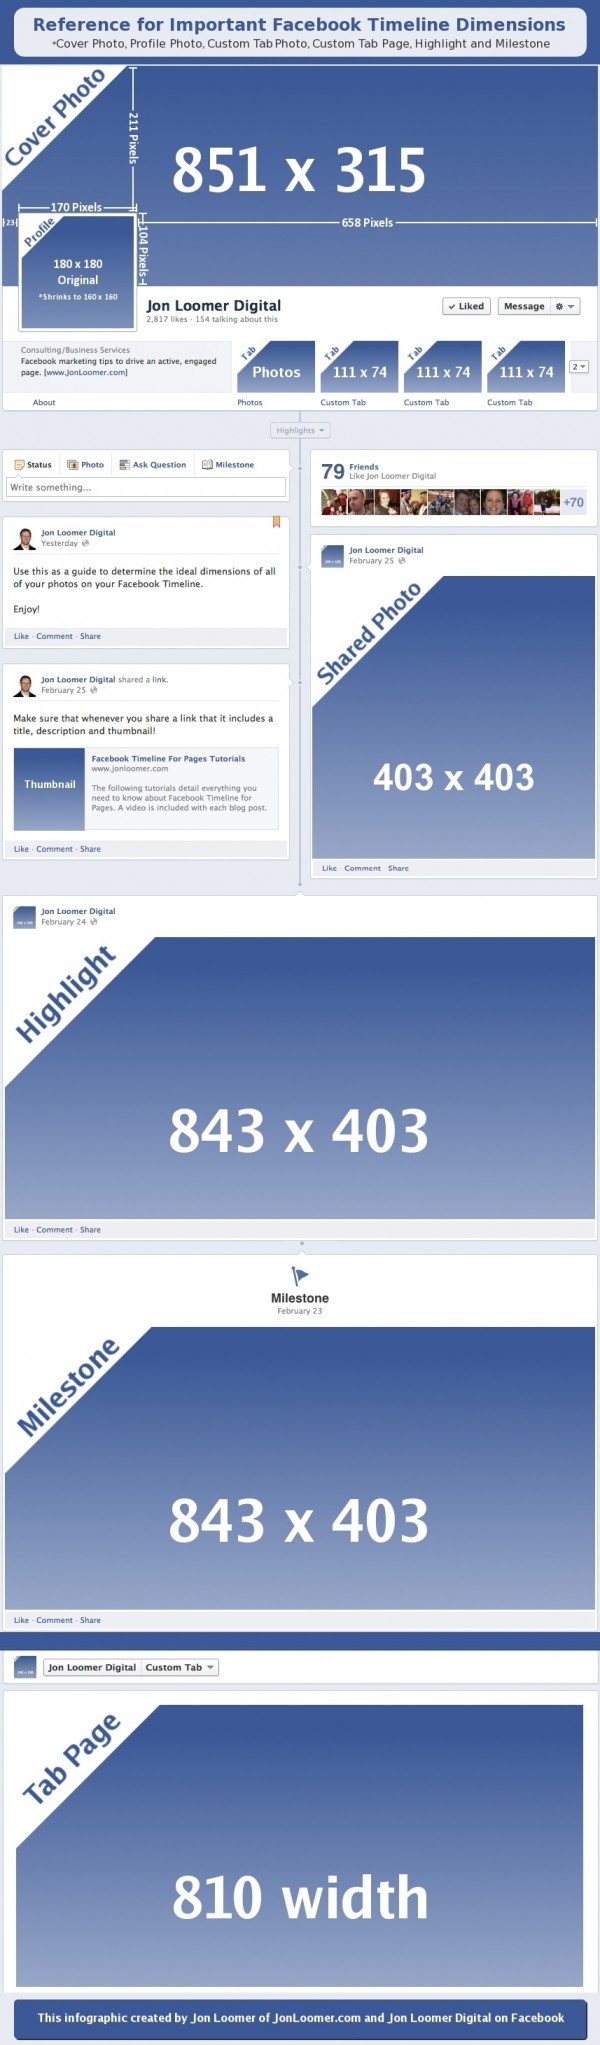 What size should images be in your Facebook Timeline